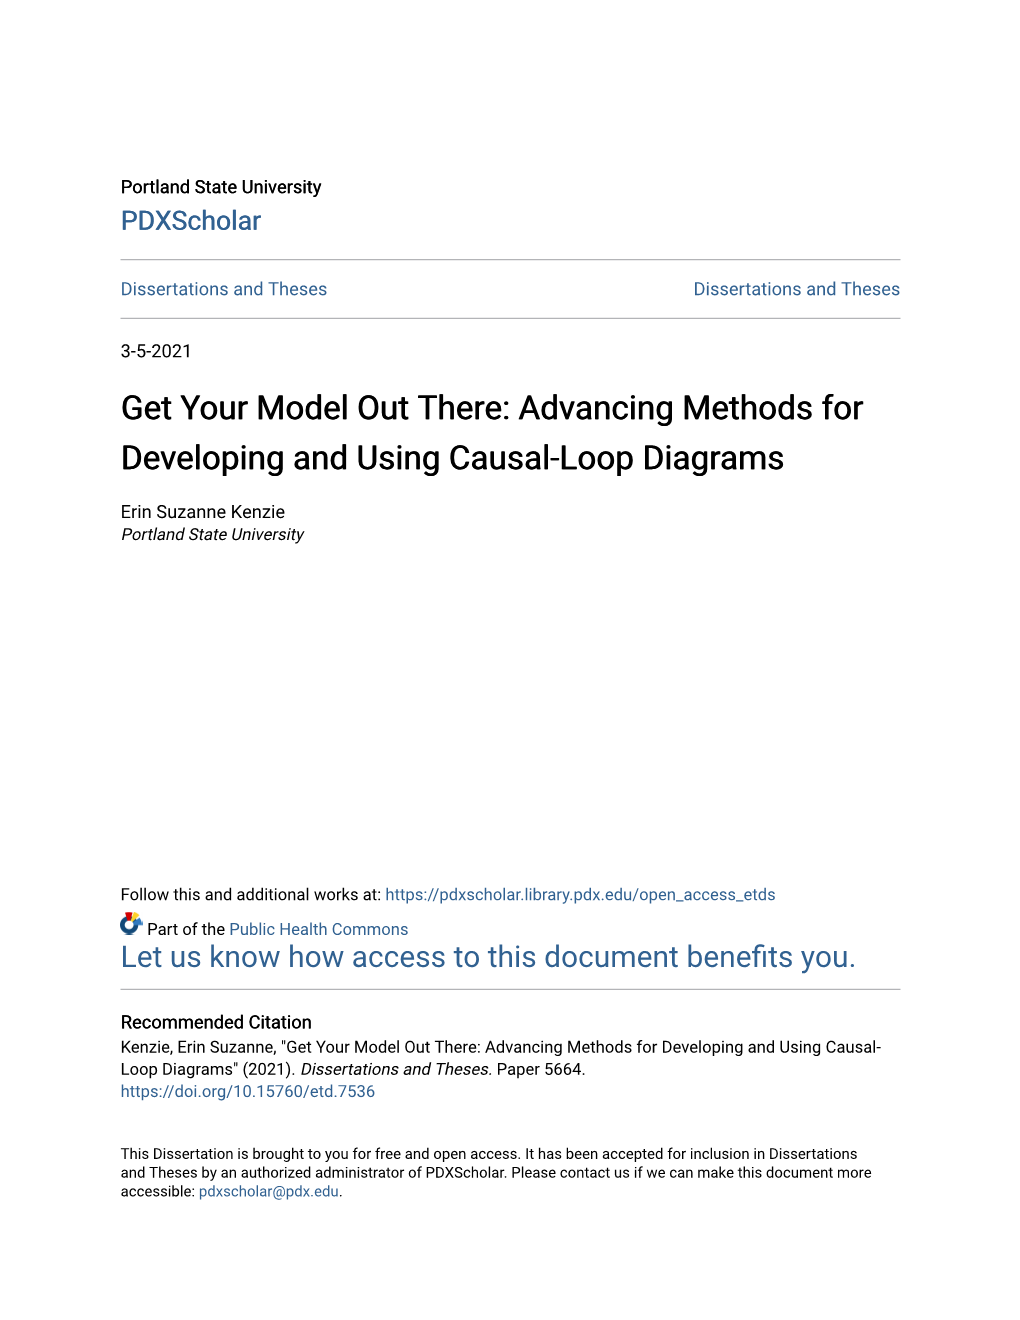 Advancing Methods for Developing and Using Causal-Loop Diagrams